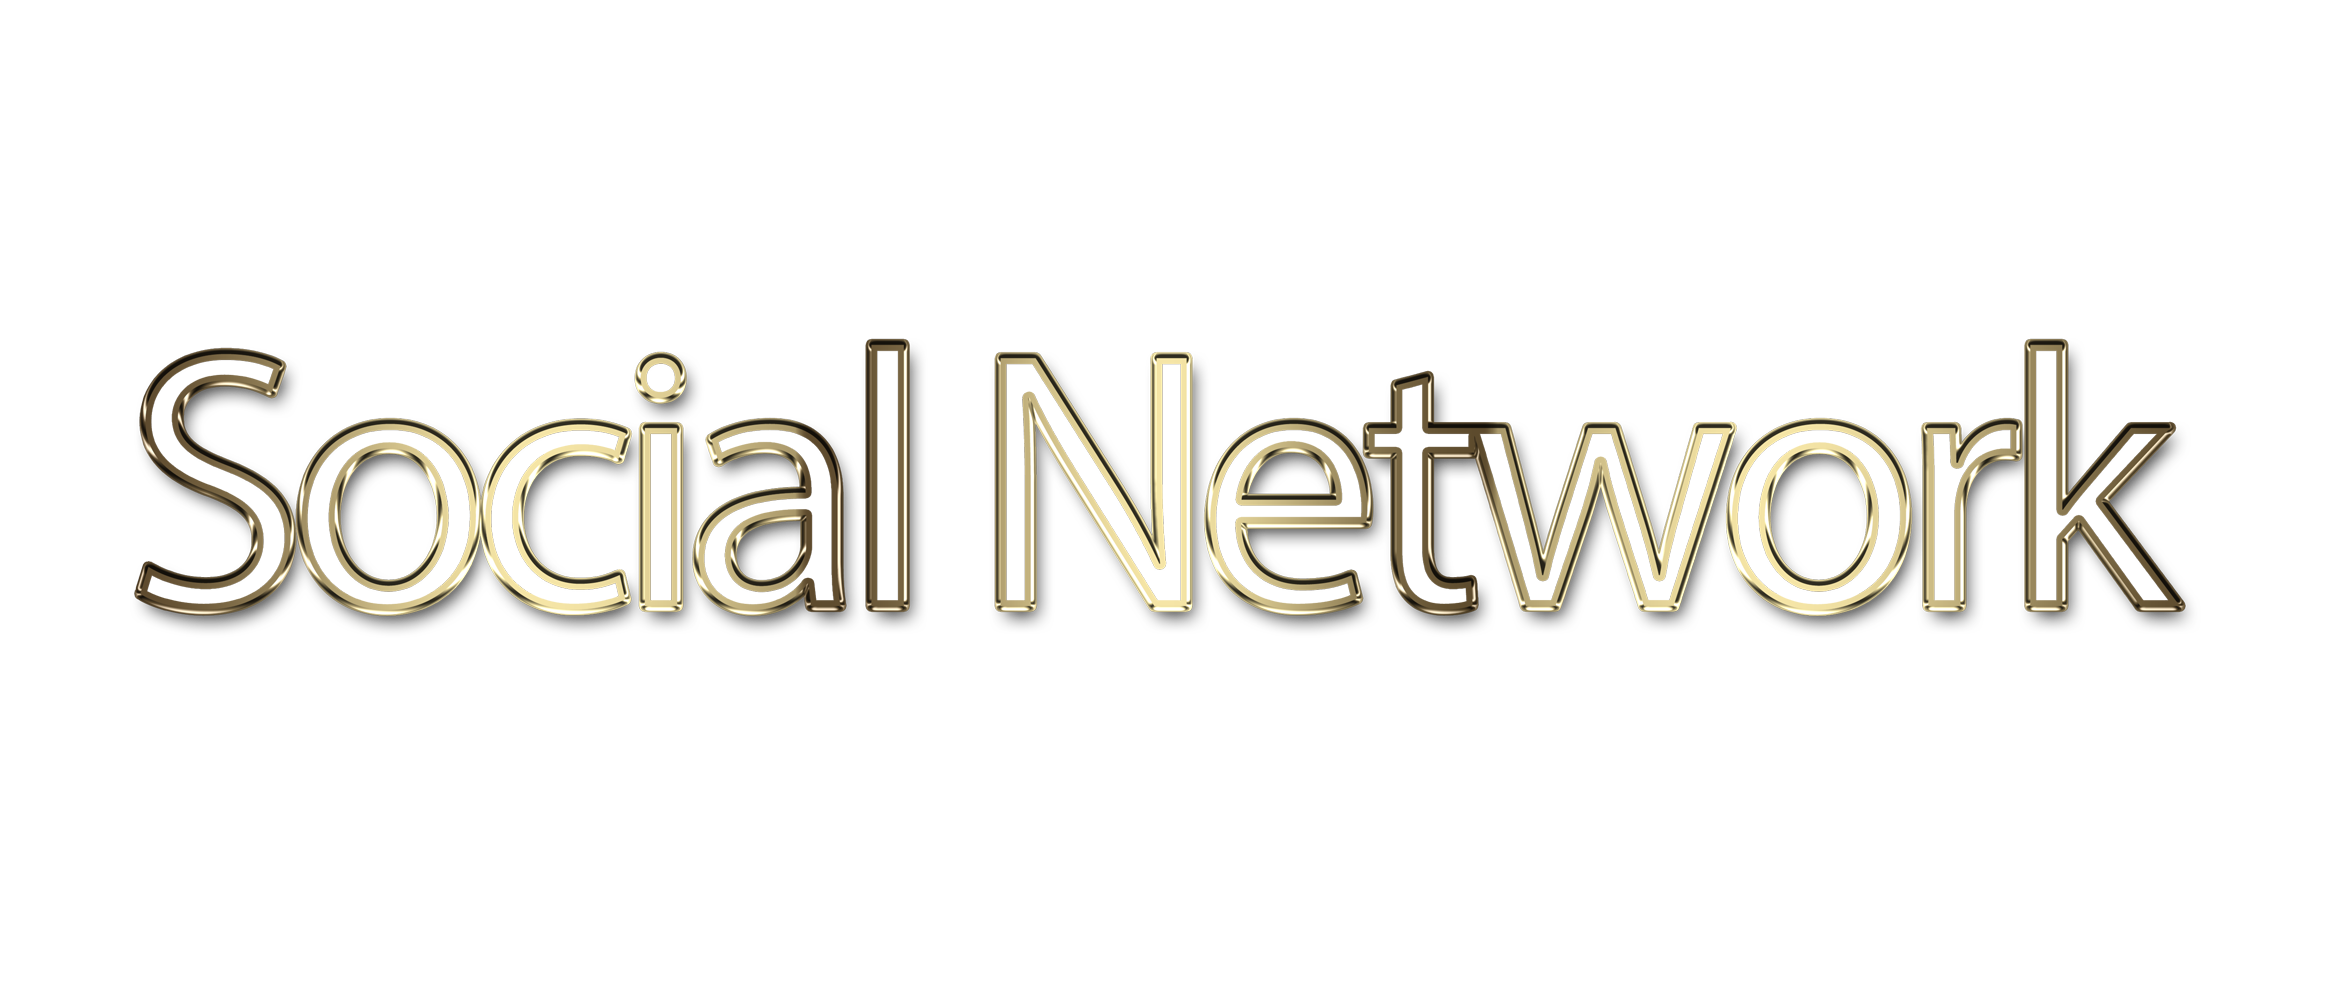 Social Network png, word Social Network png, Social Network word png, Social Network text png, Social Network letters png, Social Network word art typography PNG images, transparent png